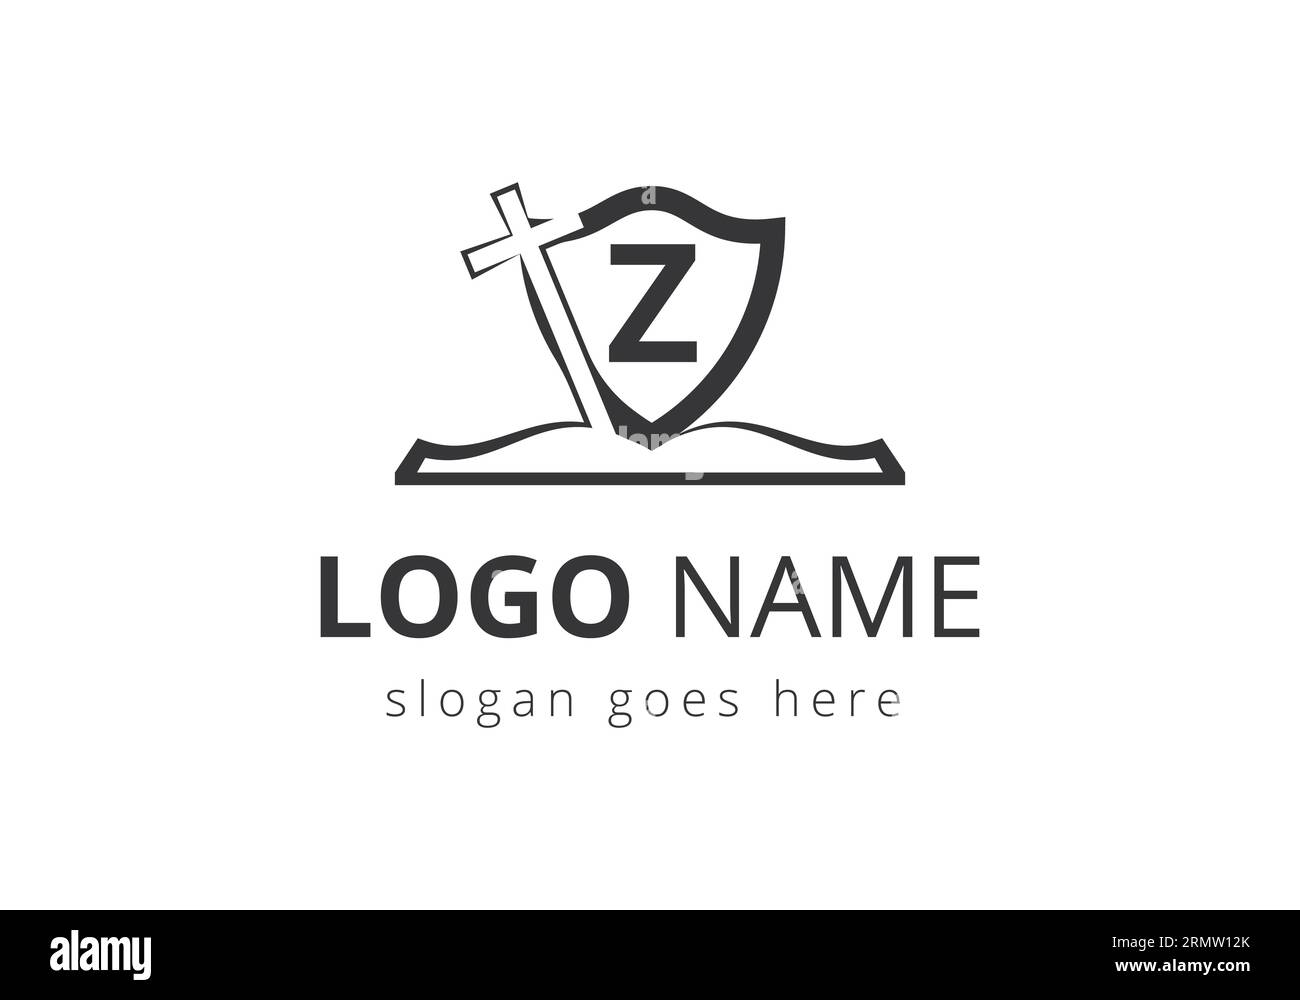 Church logo With Z Letter Concept. Christian sign symbols. The cross of Jesus logo for christian church Stock Vector